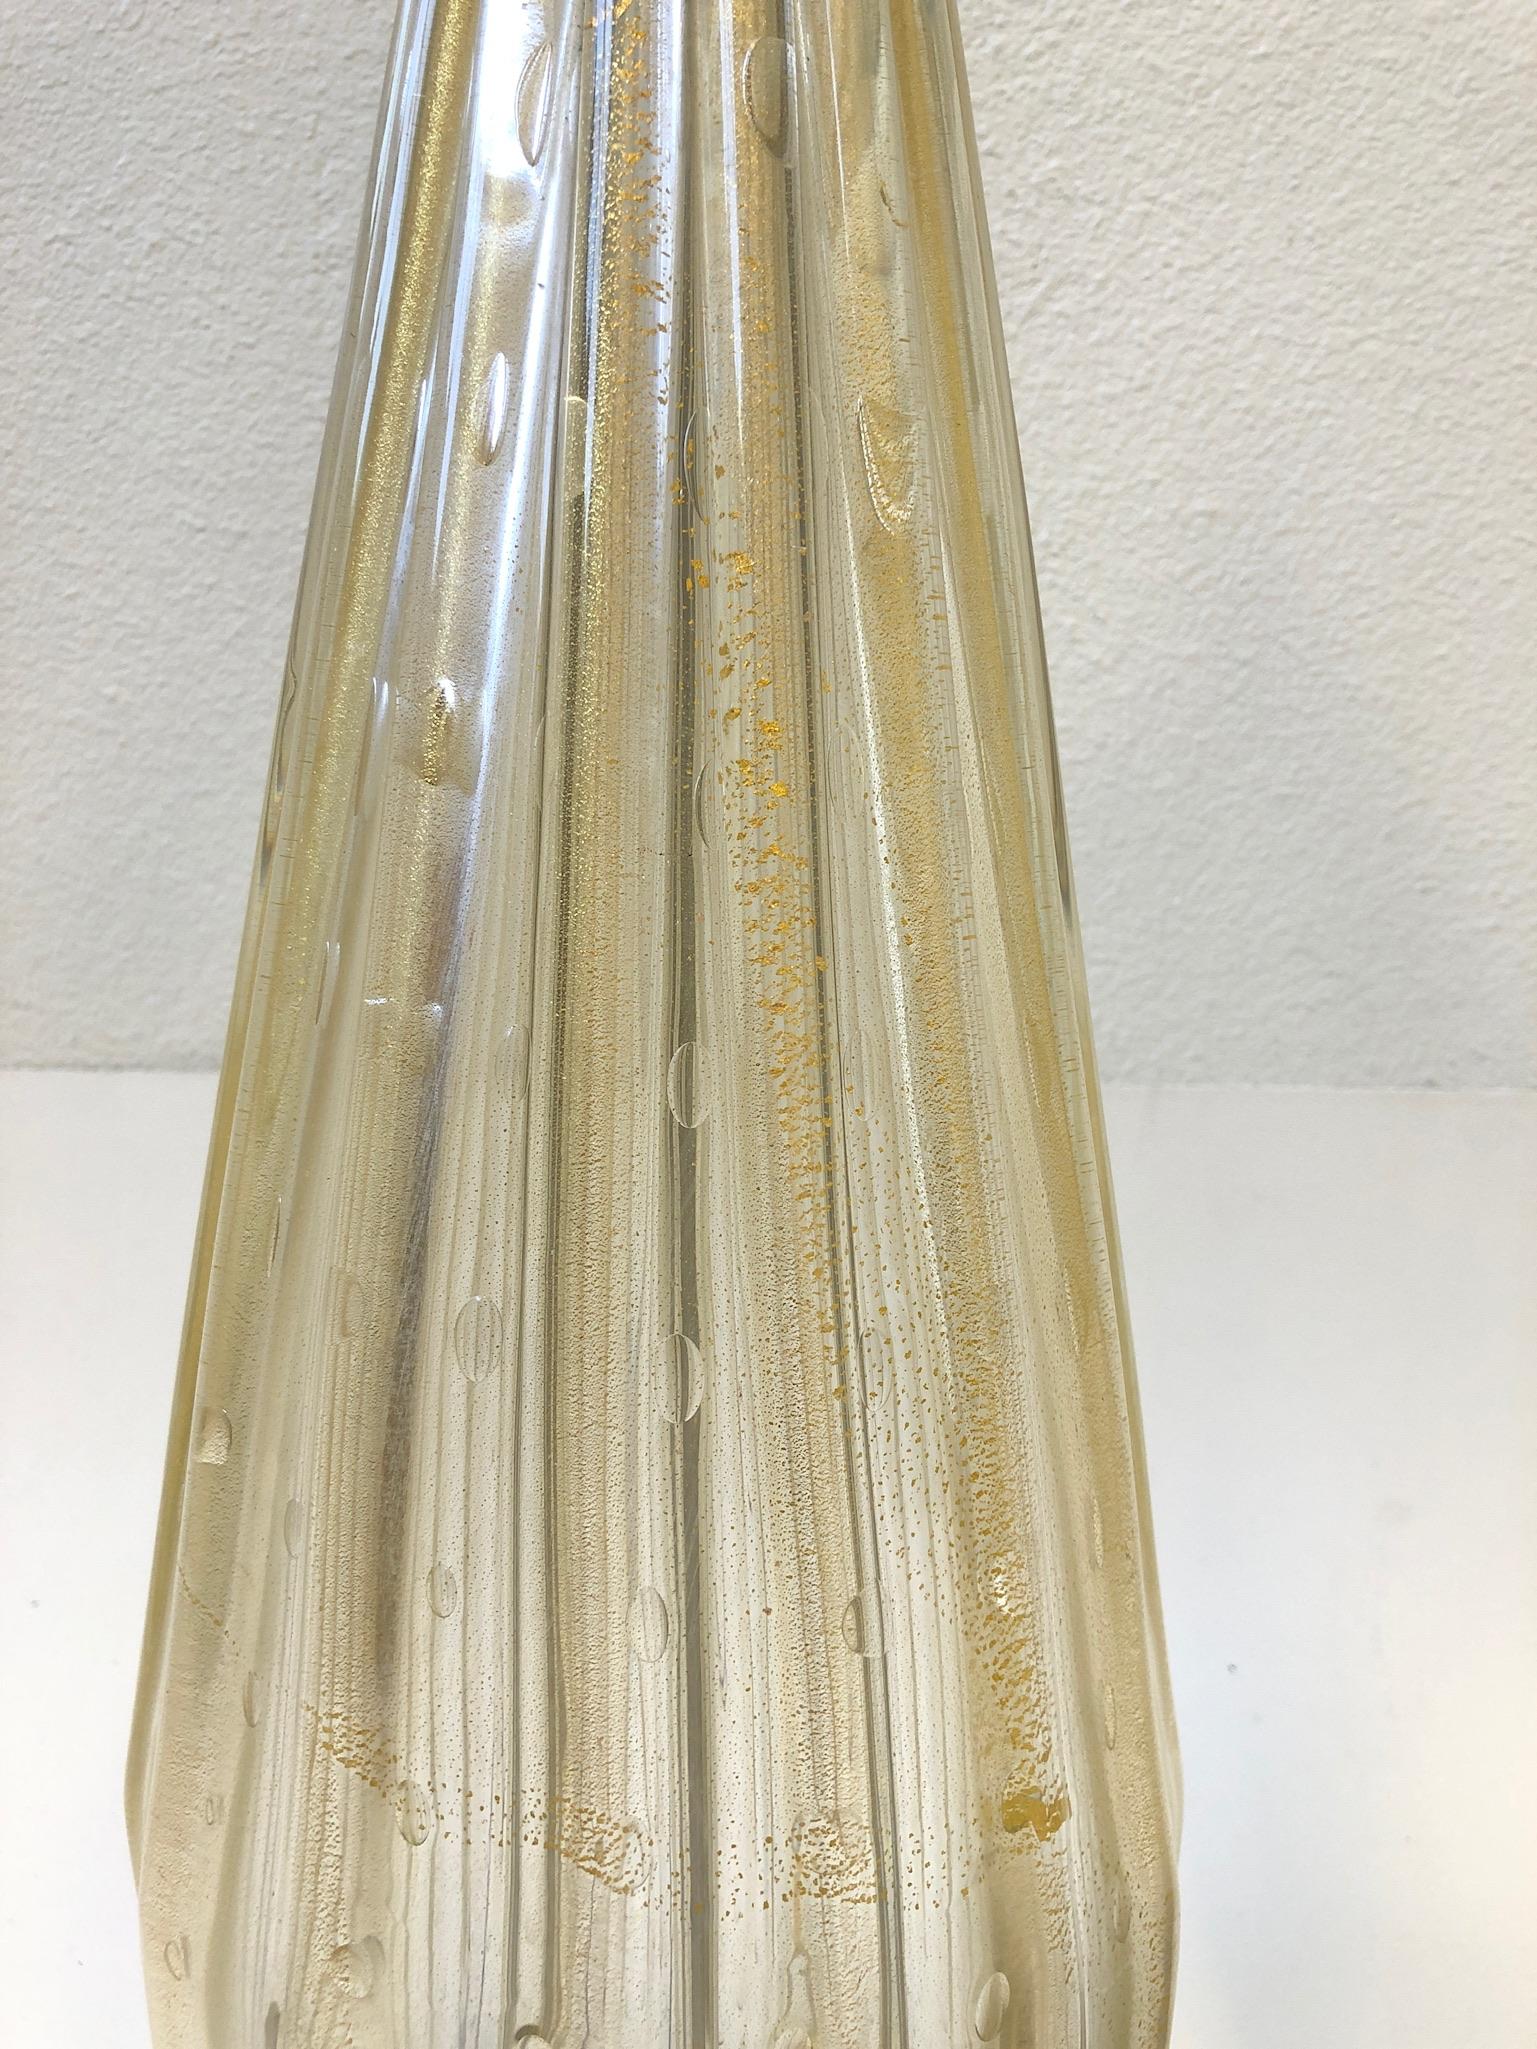 Pair of Italian Gold Dust Murano Glass and Brass Table Lamps by Marbro Lamp Co.  2